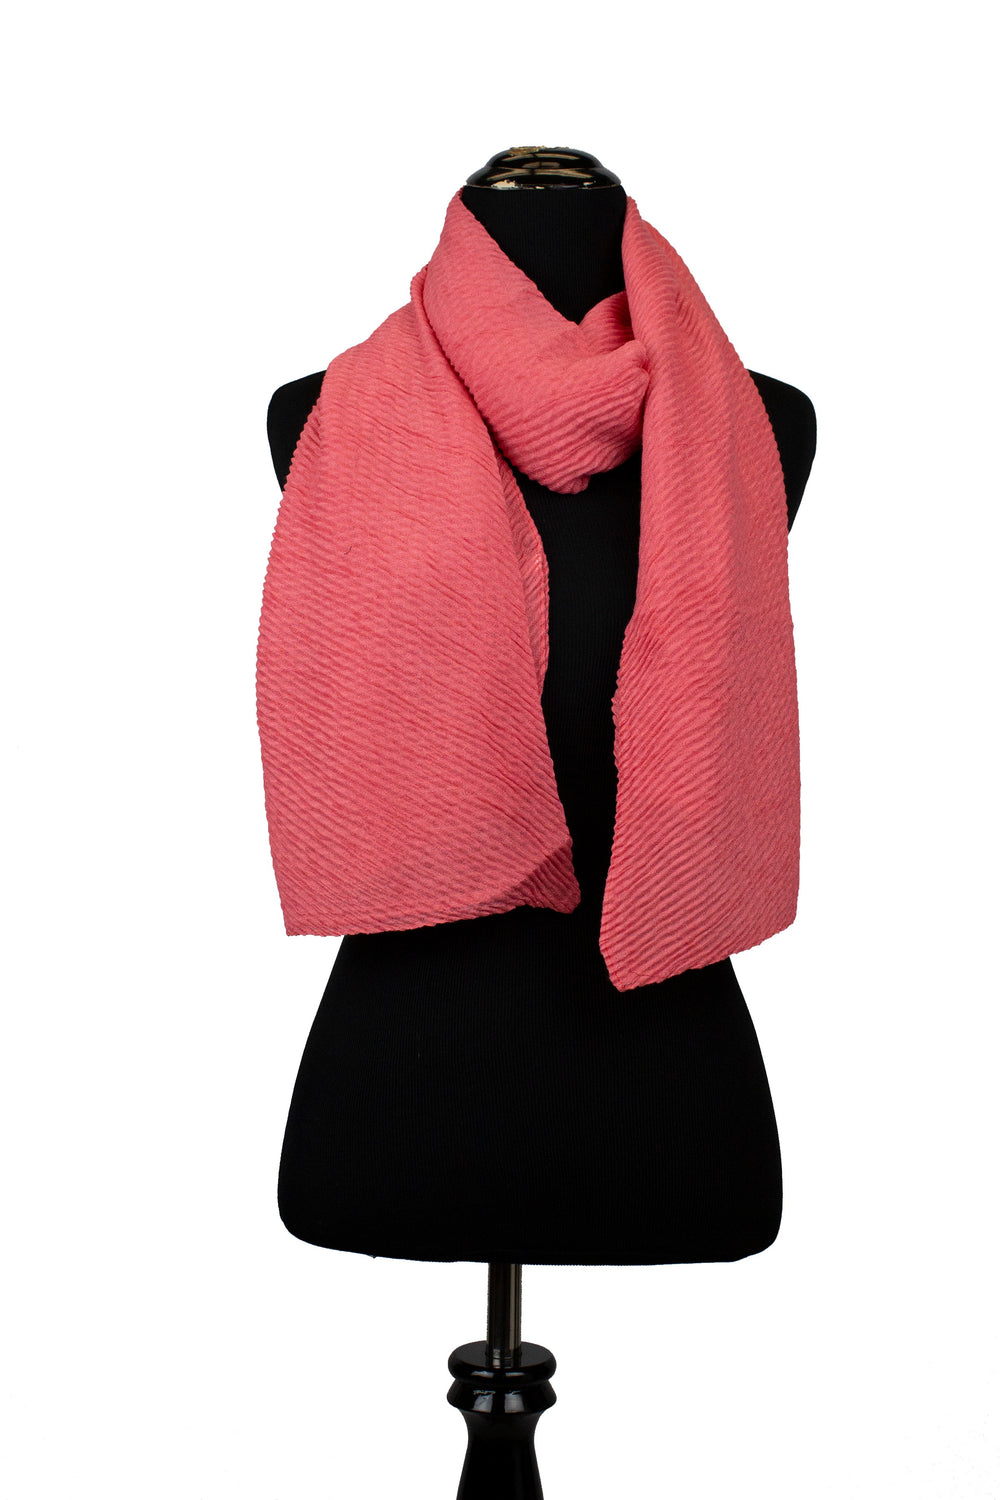 hot pink hijab with pleats